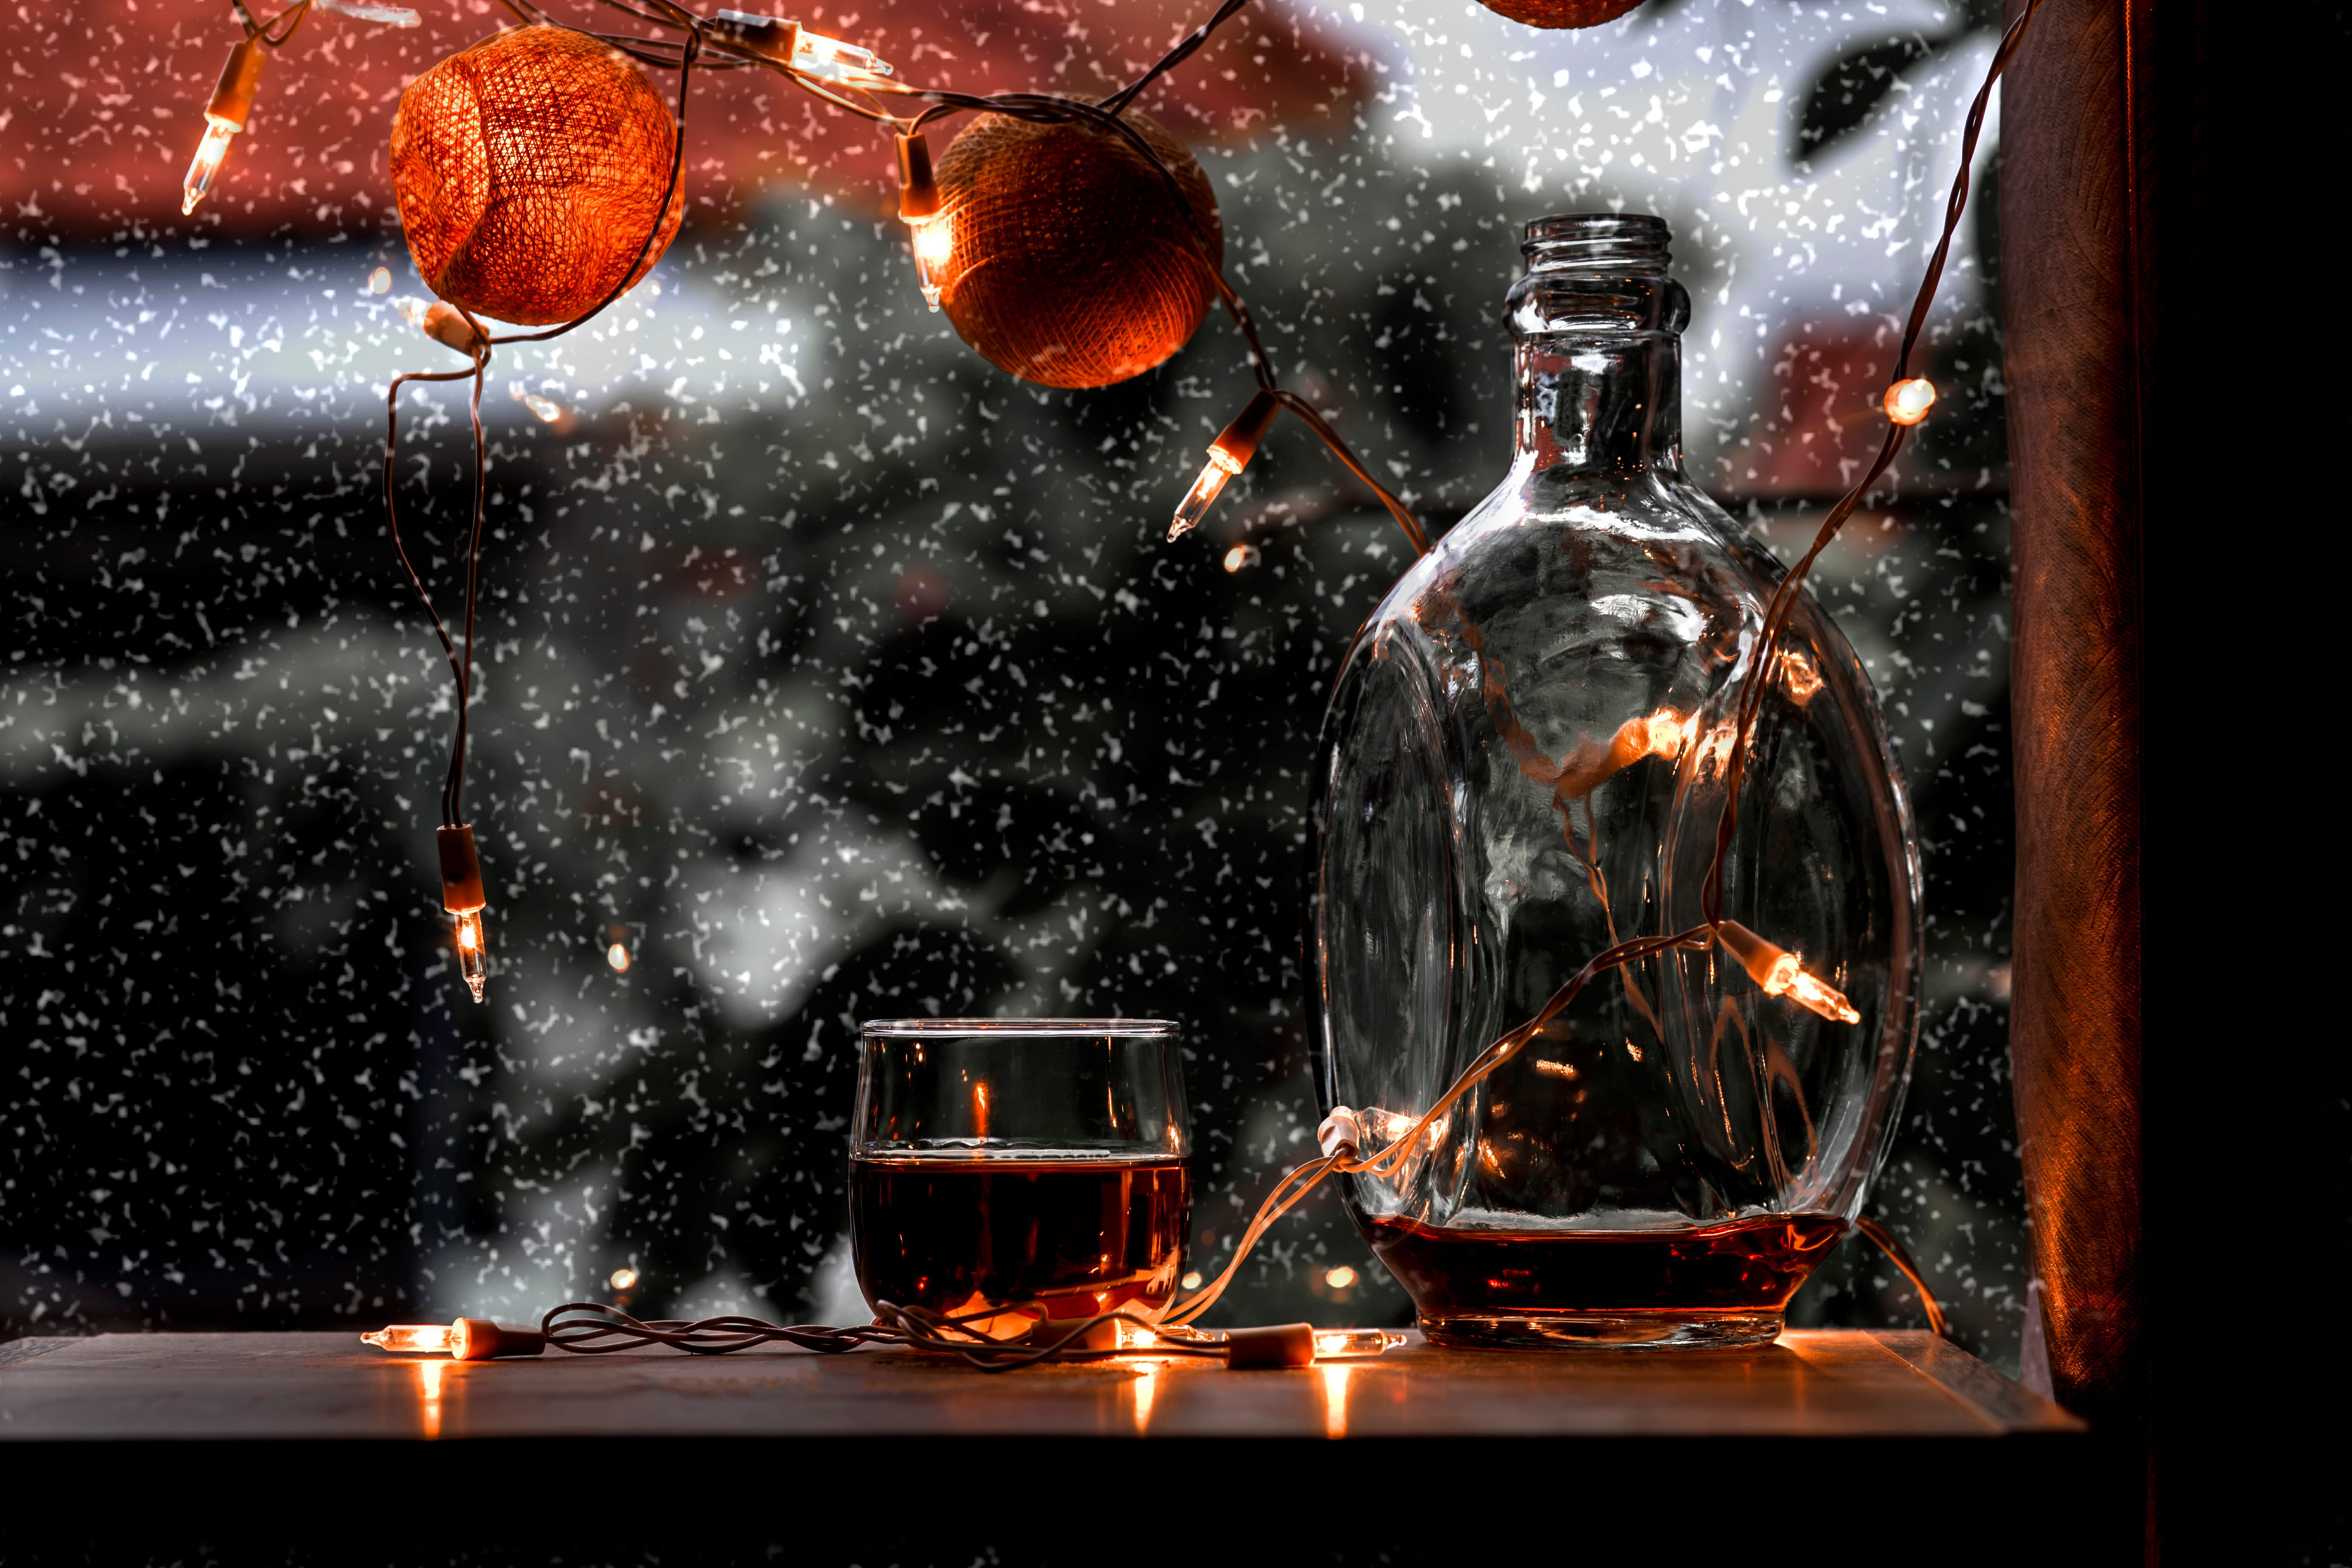 Top 30 Best whisky gift ideas under £30 for Christmas 2020 in the UK